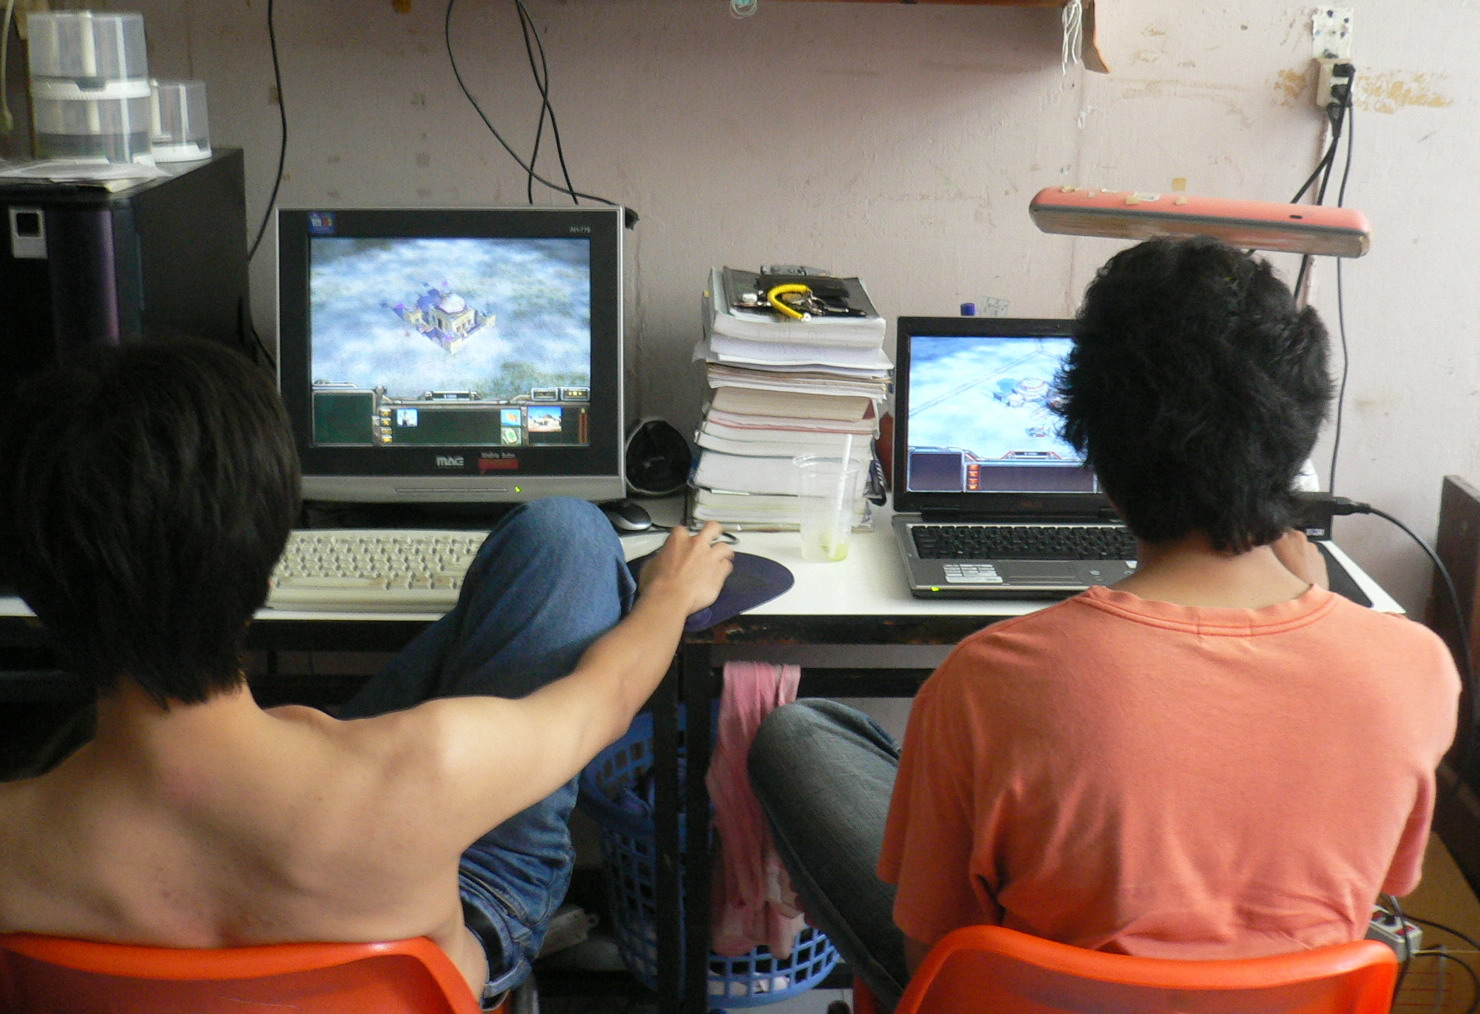 Brains Of Video Game-Addicted Teens Are Hyper Connected